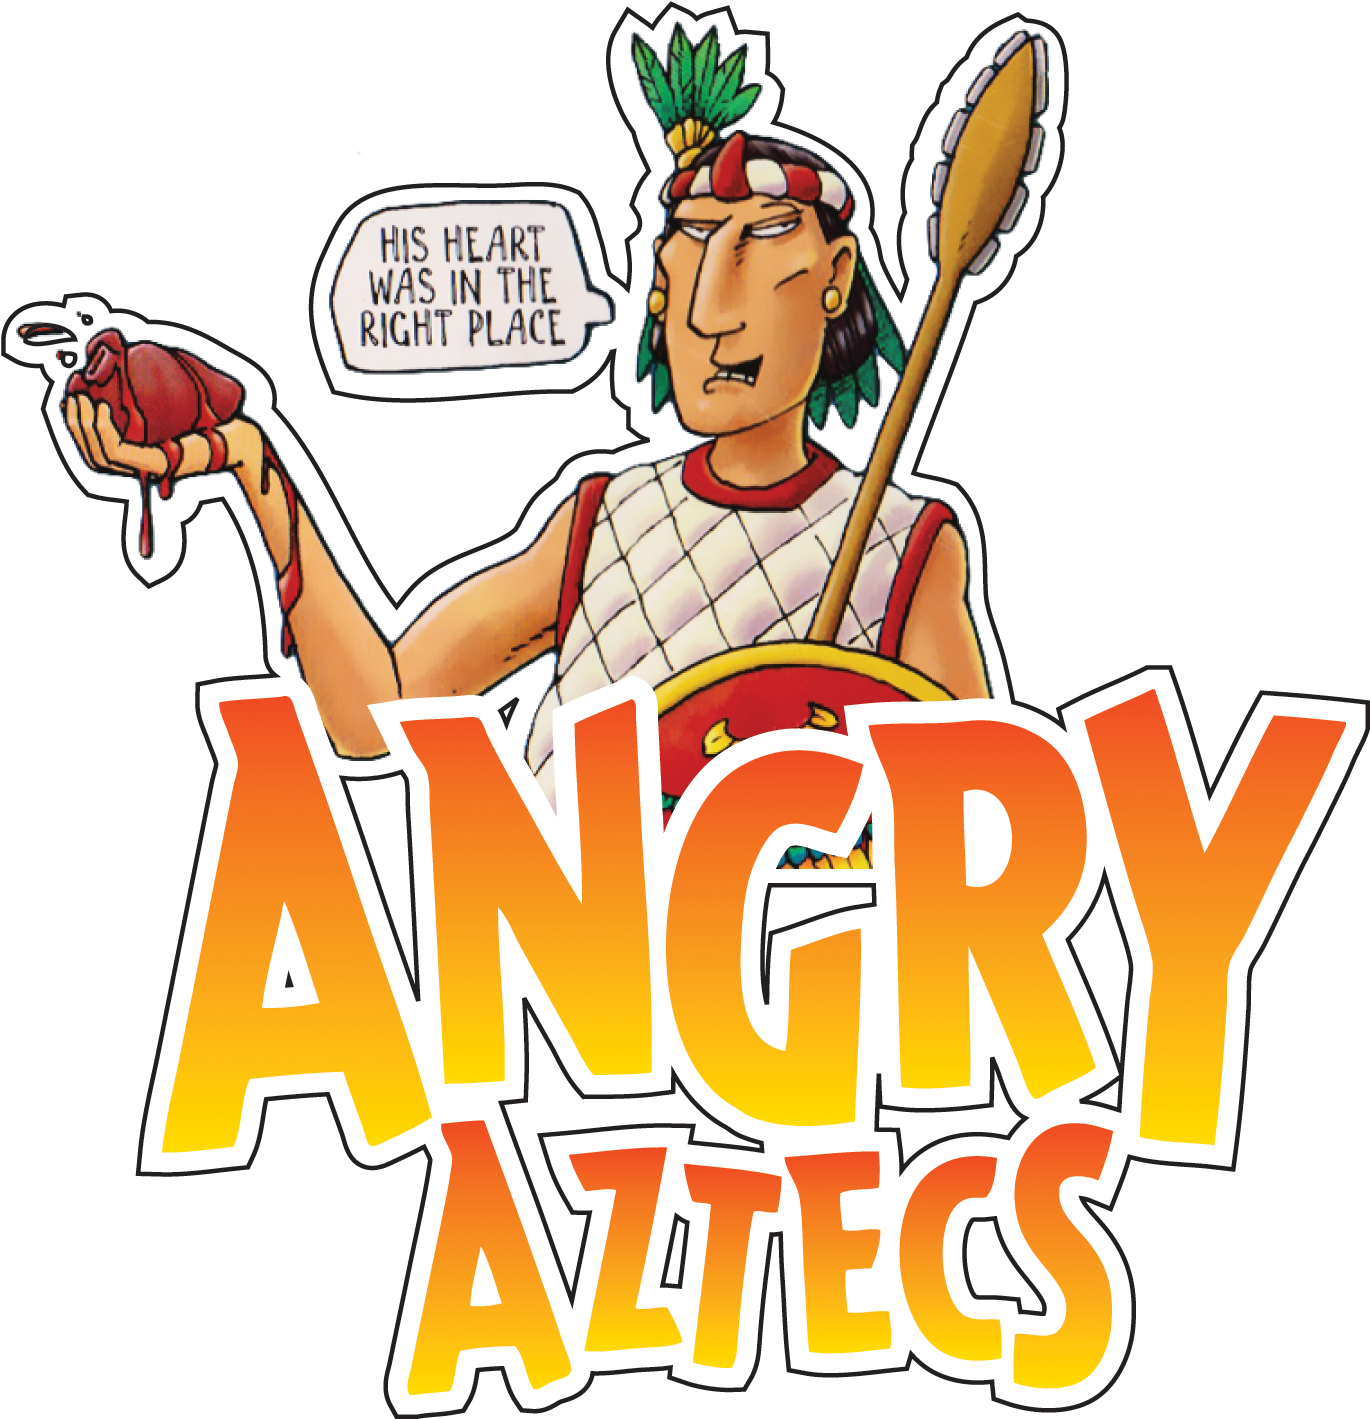 My First Post - Horrible Histories: Angry Aztecs (1500x1500)